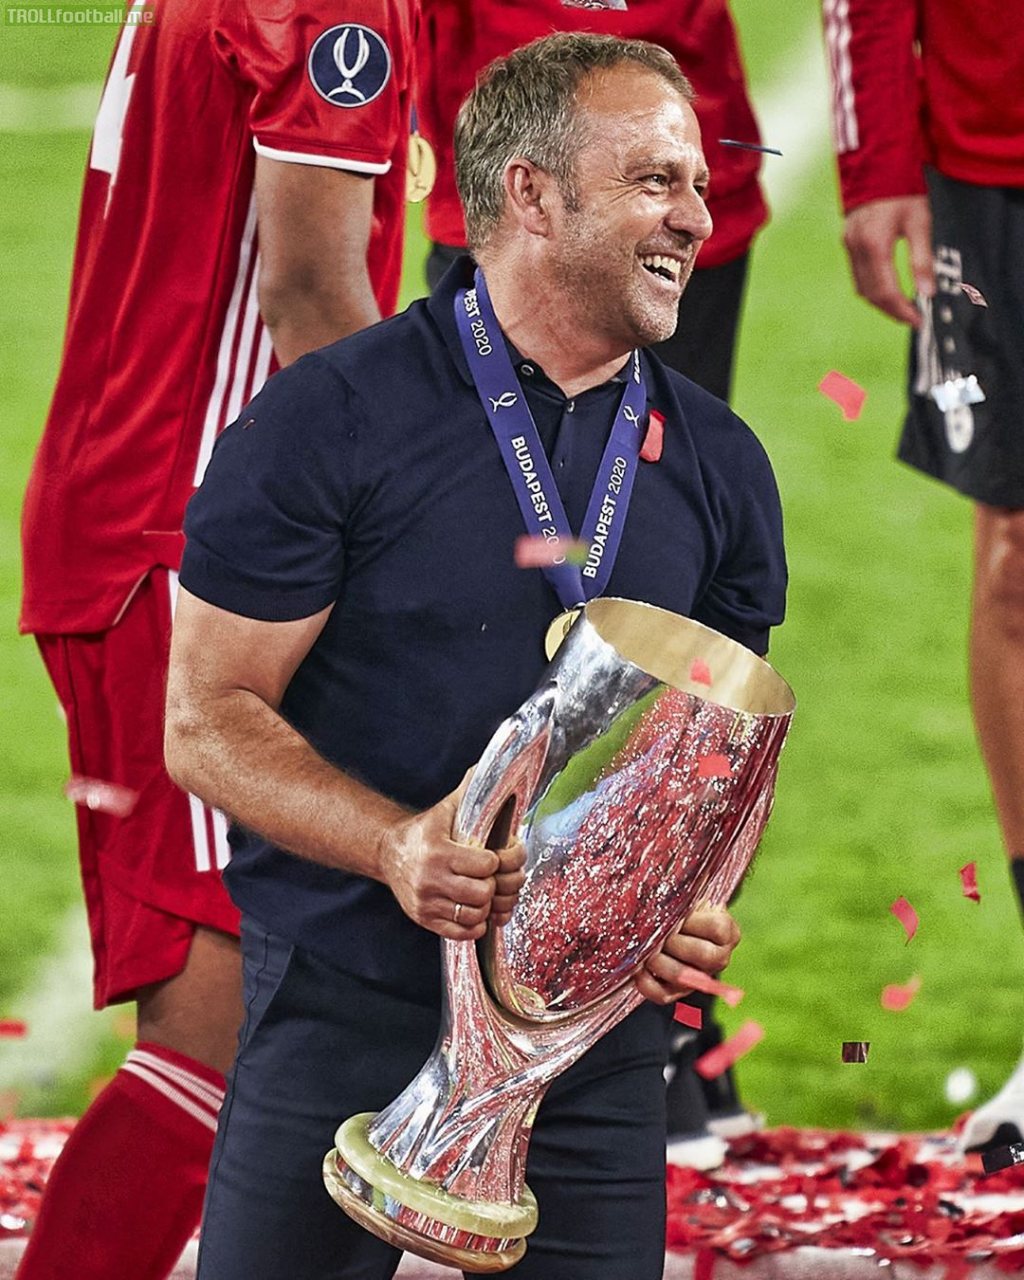 On average, Hans-Dieter Flick has won a Trophy every 9.5 games as manager of FC Bayern Munich